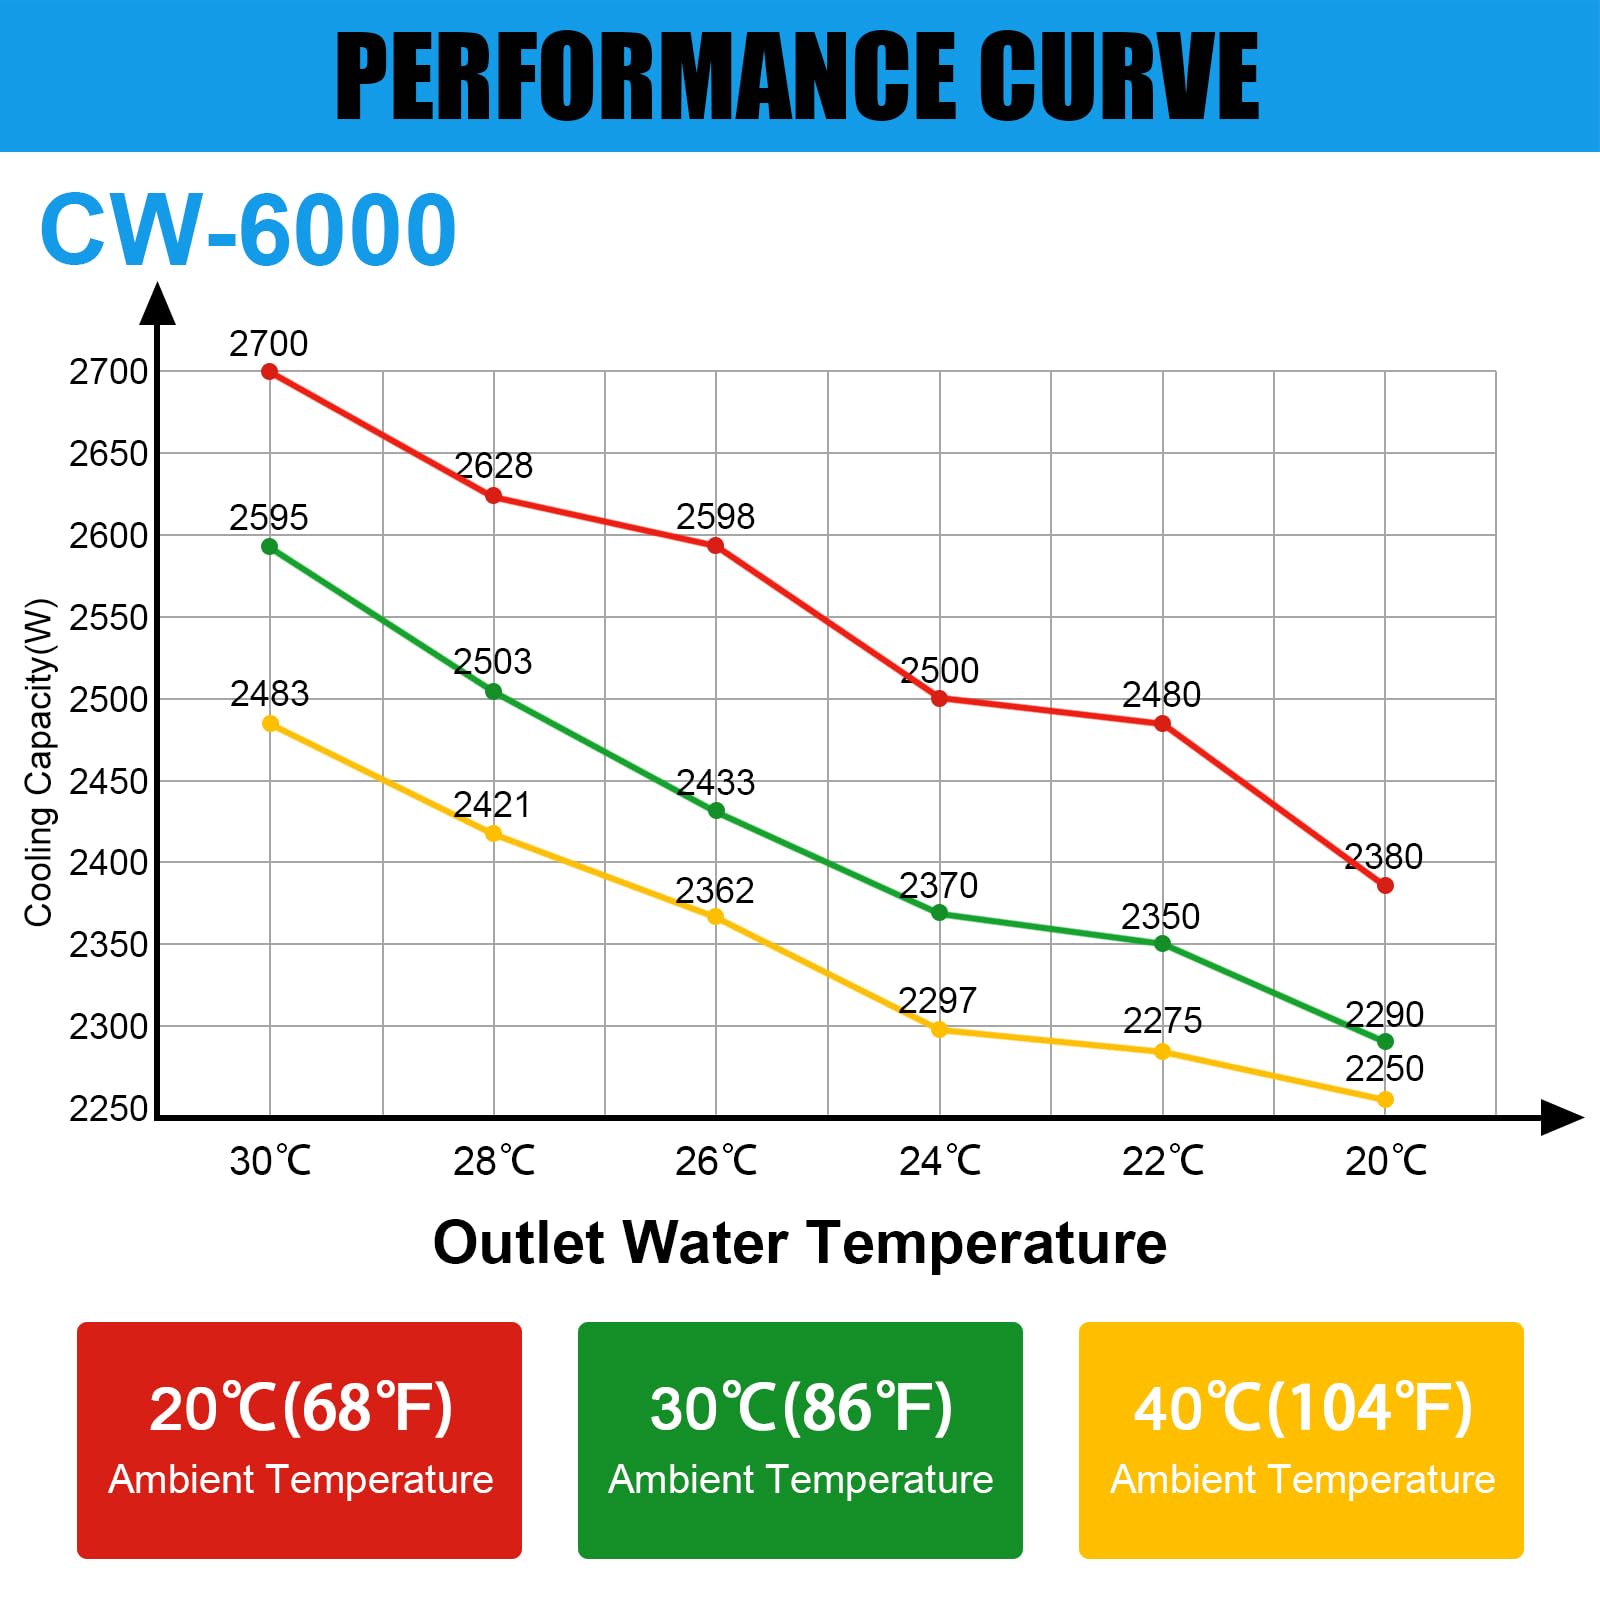 CW-6000 Industrial Chiller, 15L, 0.73hp, 8.7gpm Cooling System